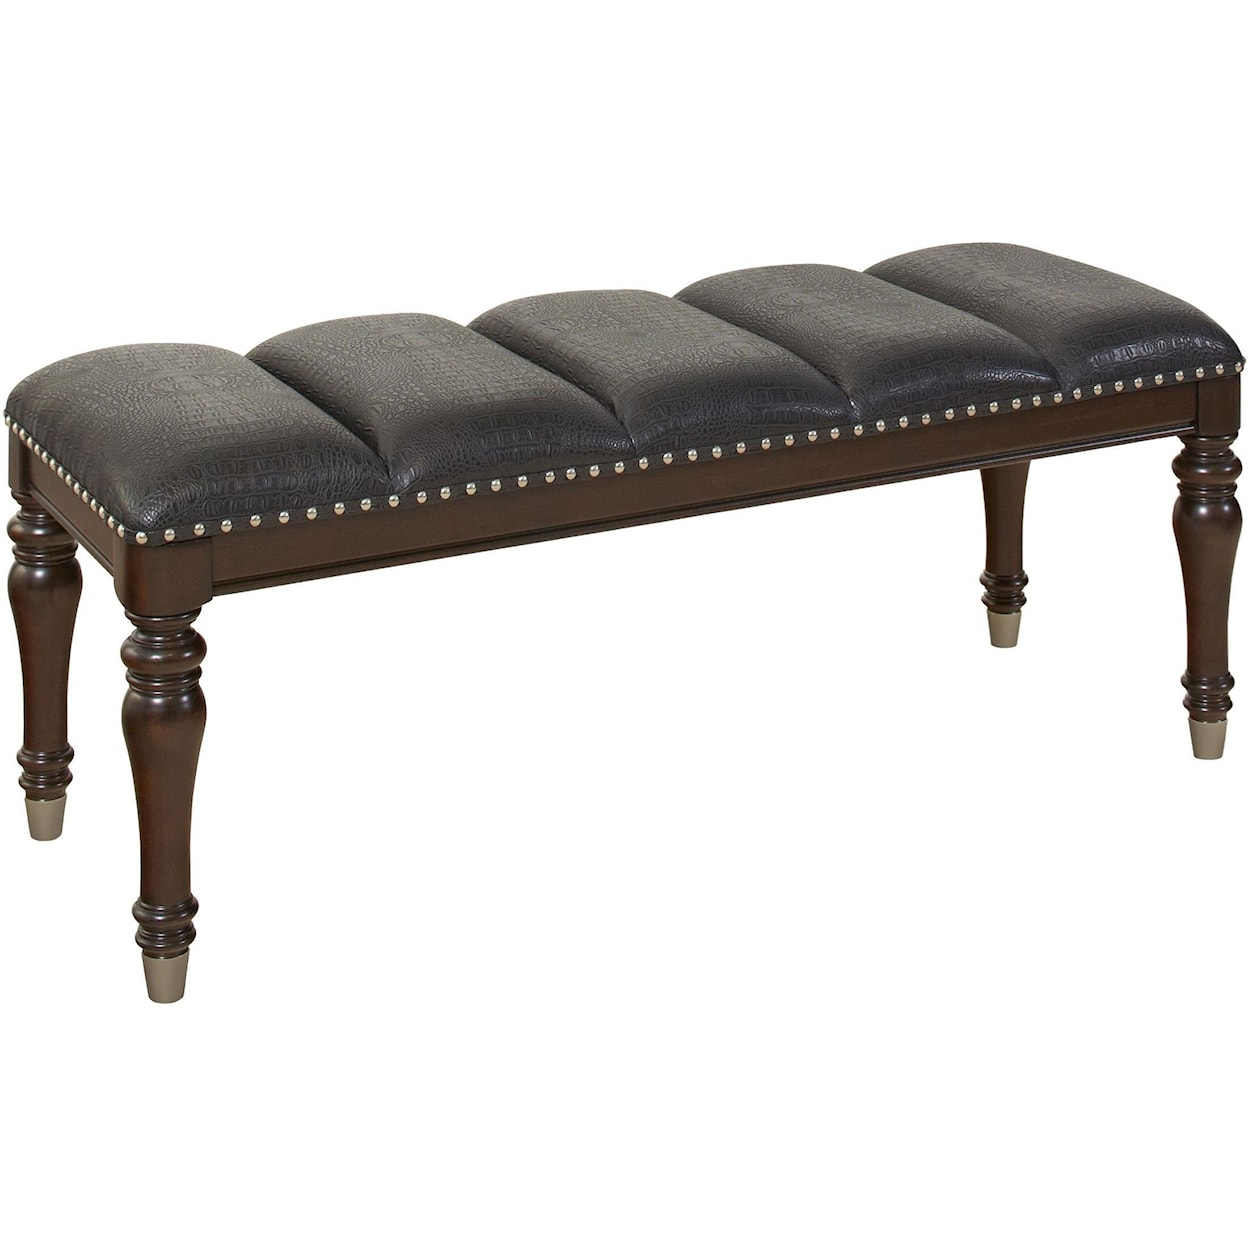 Avalon Furniture Dundee Place Bench